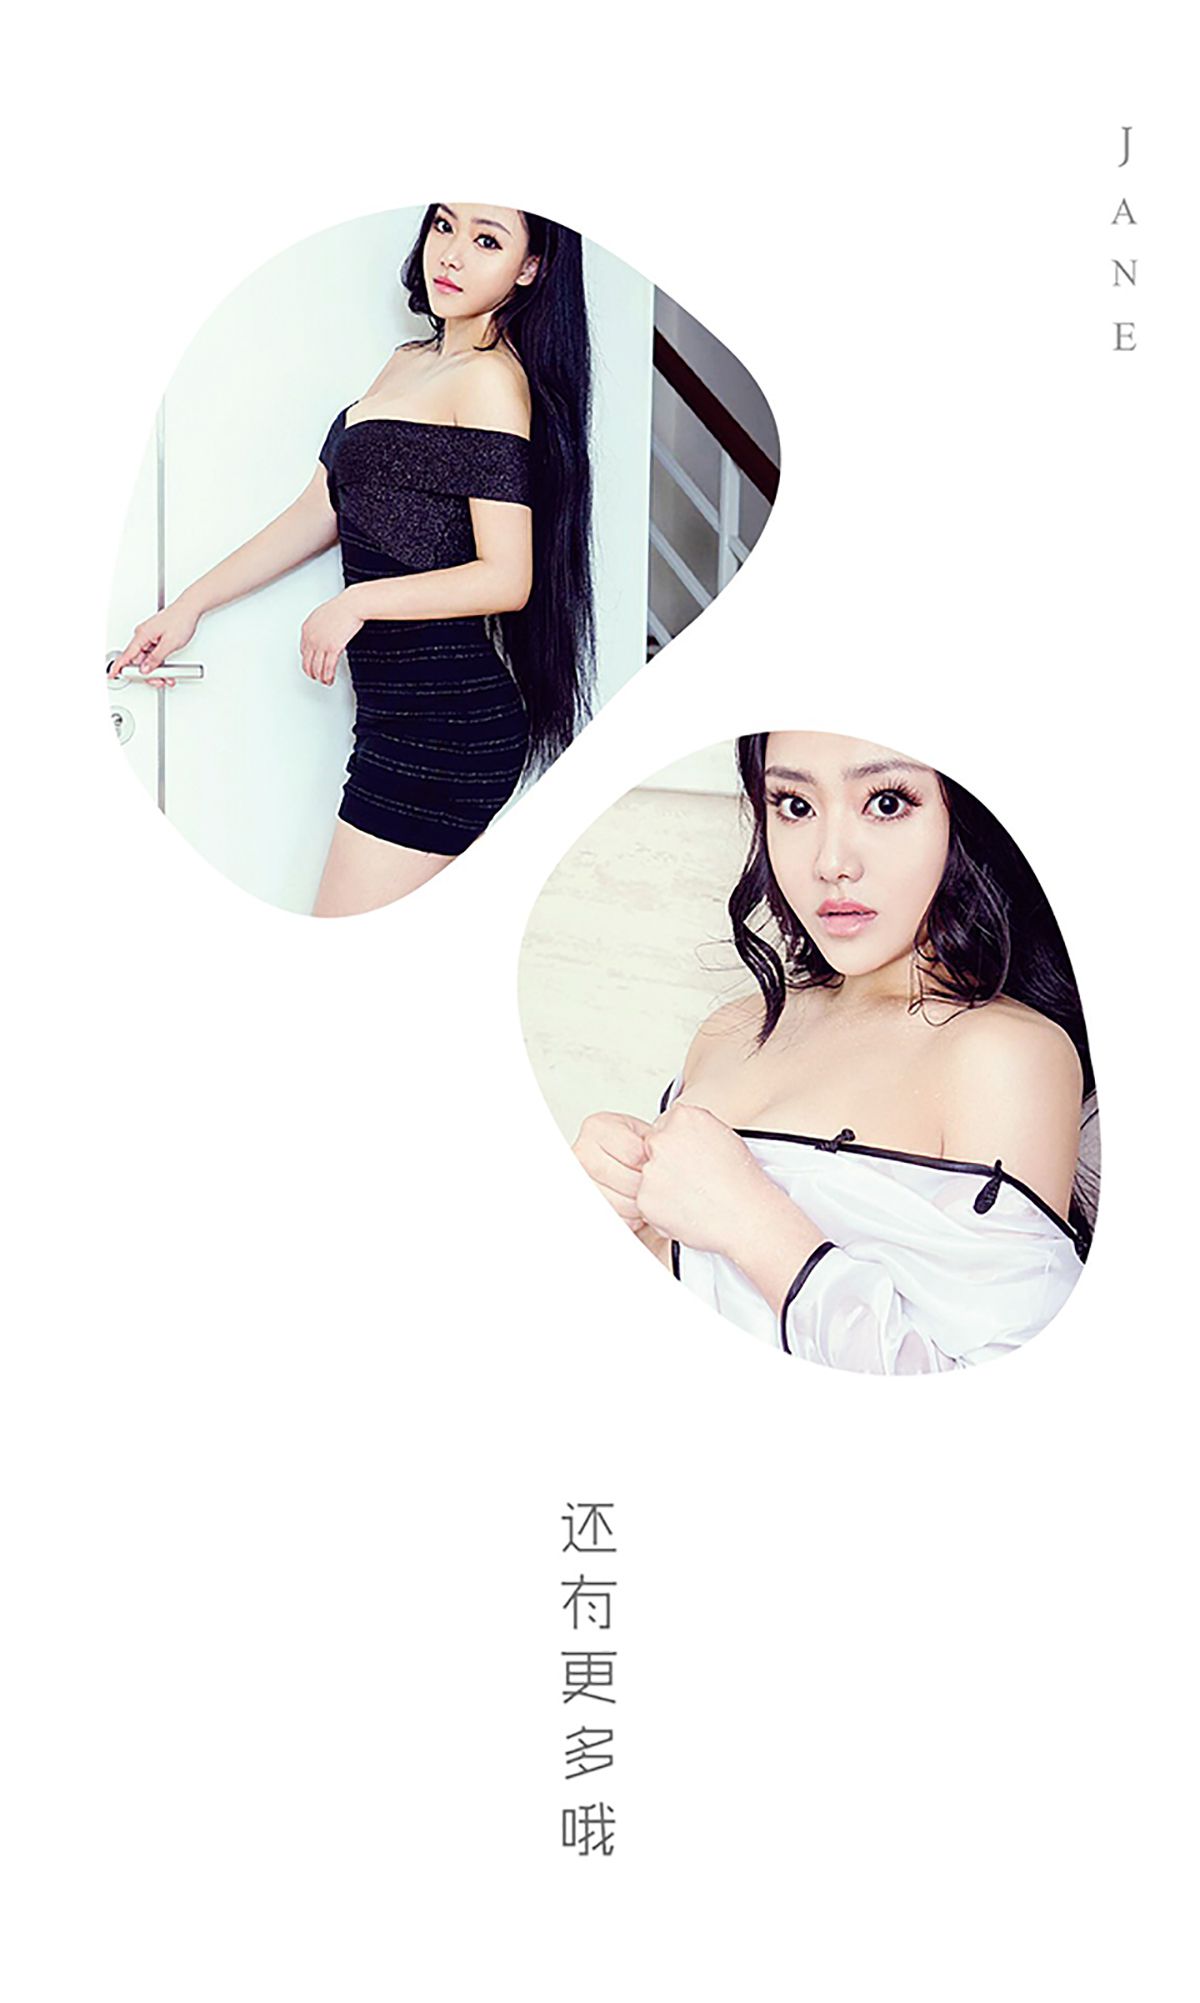 Yi Ran “When the last touch of sadness flows from the corner of the eye” [爱尤物Ugirls] No.360 Photo Album